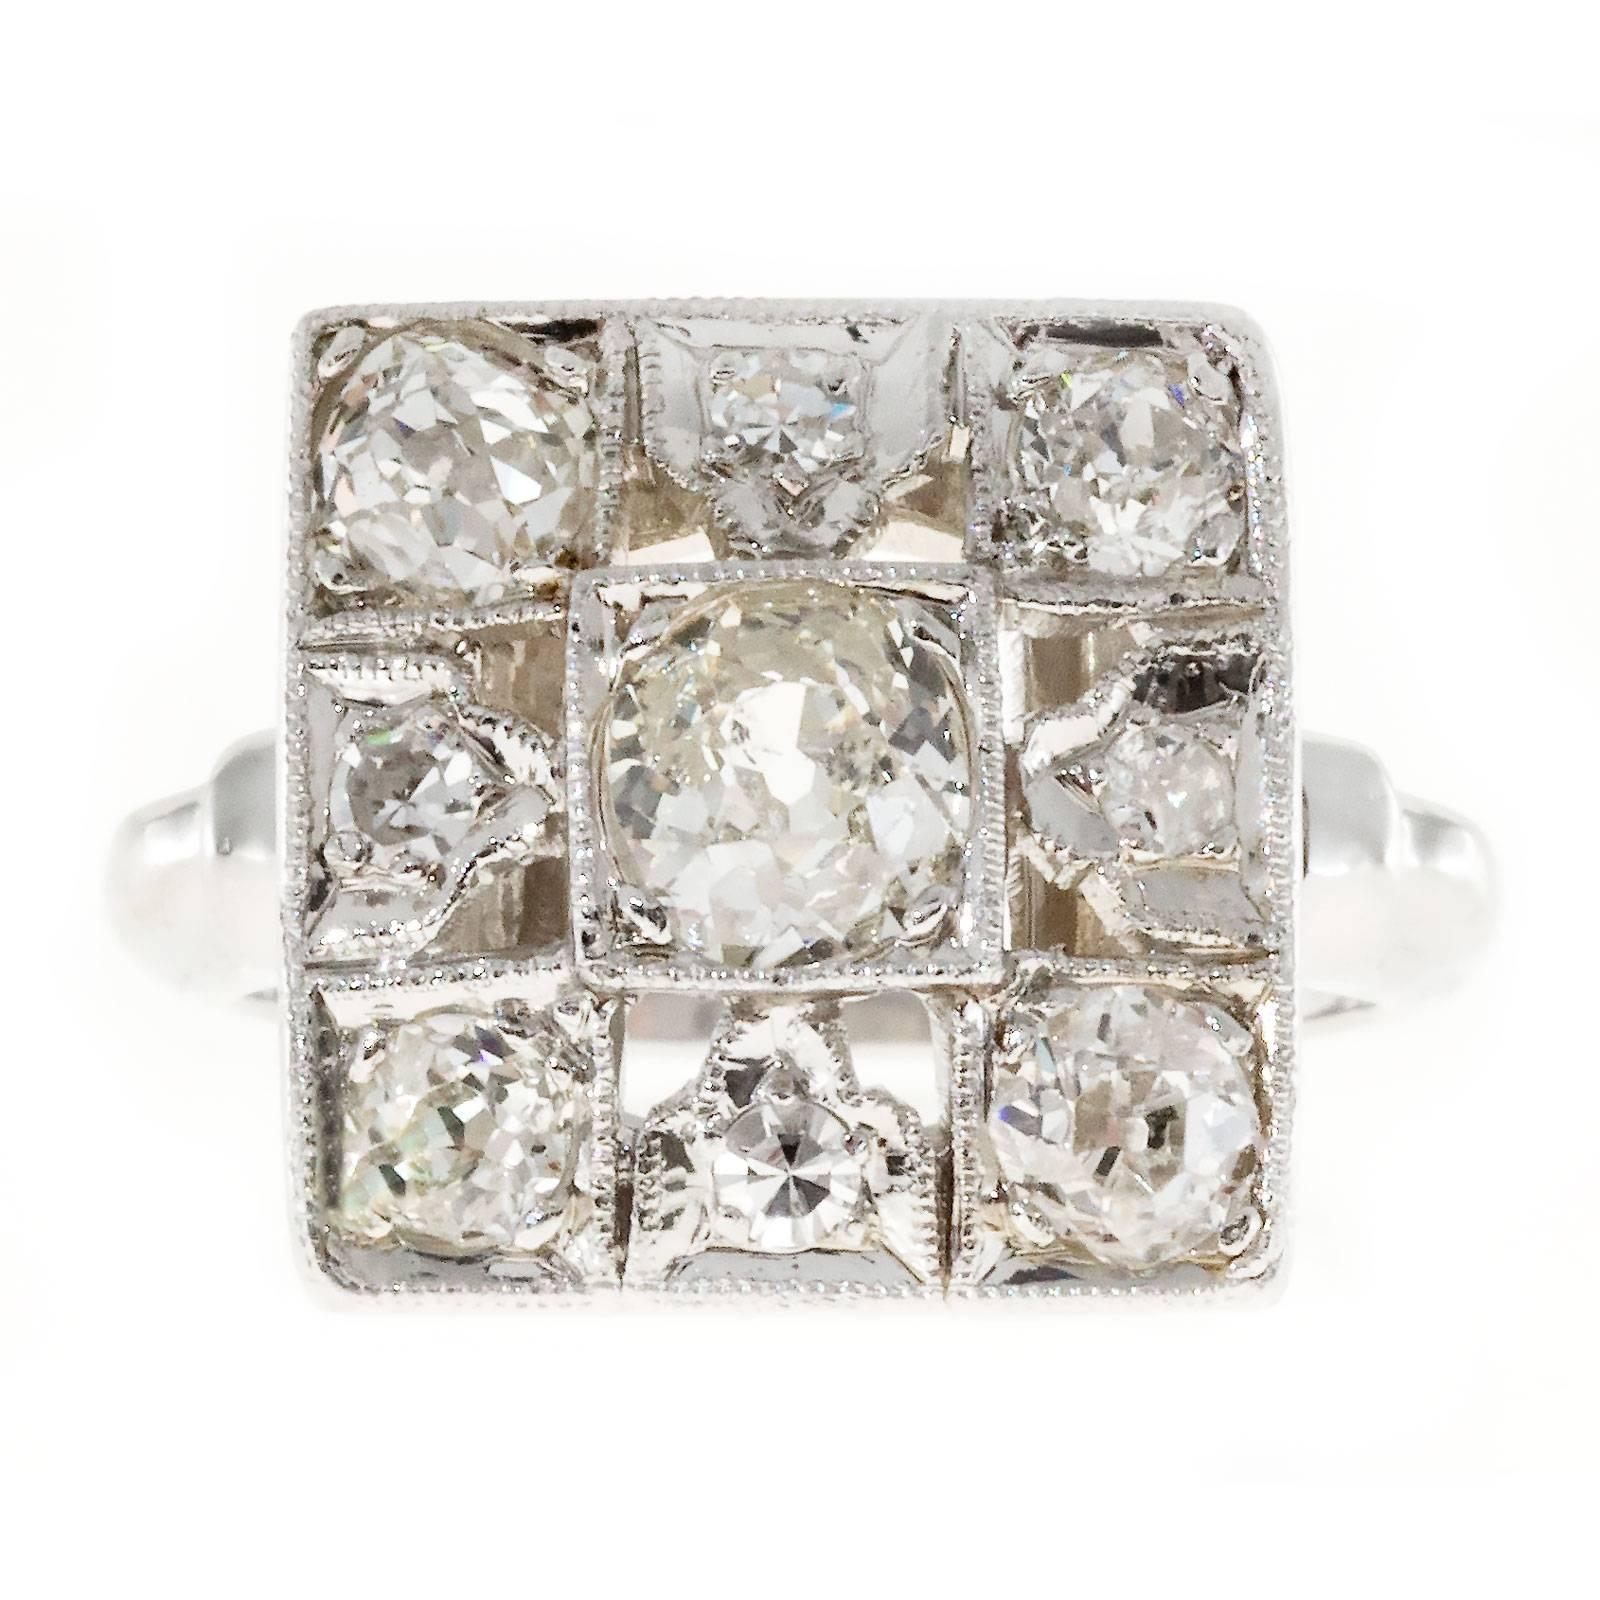 Old mine diamond pierced square top ring in solid Platinum, circa 1920's 

1 old mine cut diamond, approx. total weight .50cts, J, SI1
4 old mine cut diamonds, approx. total weight .70cts, I, SI1
4 single cut diamonds, approx. total weight